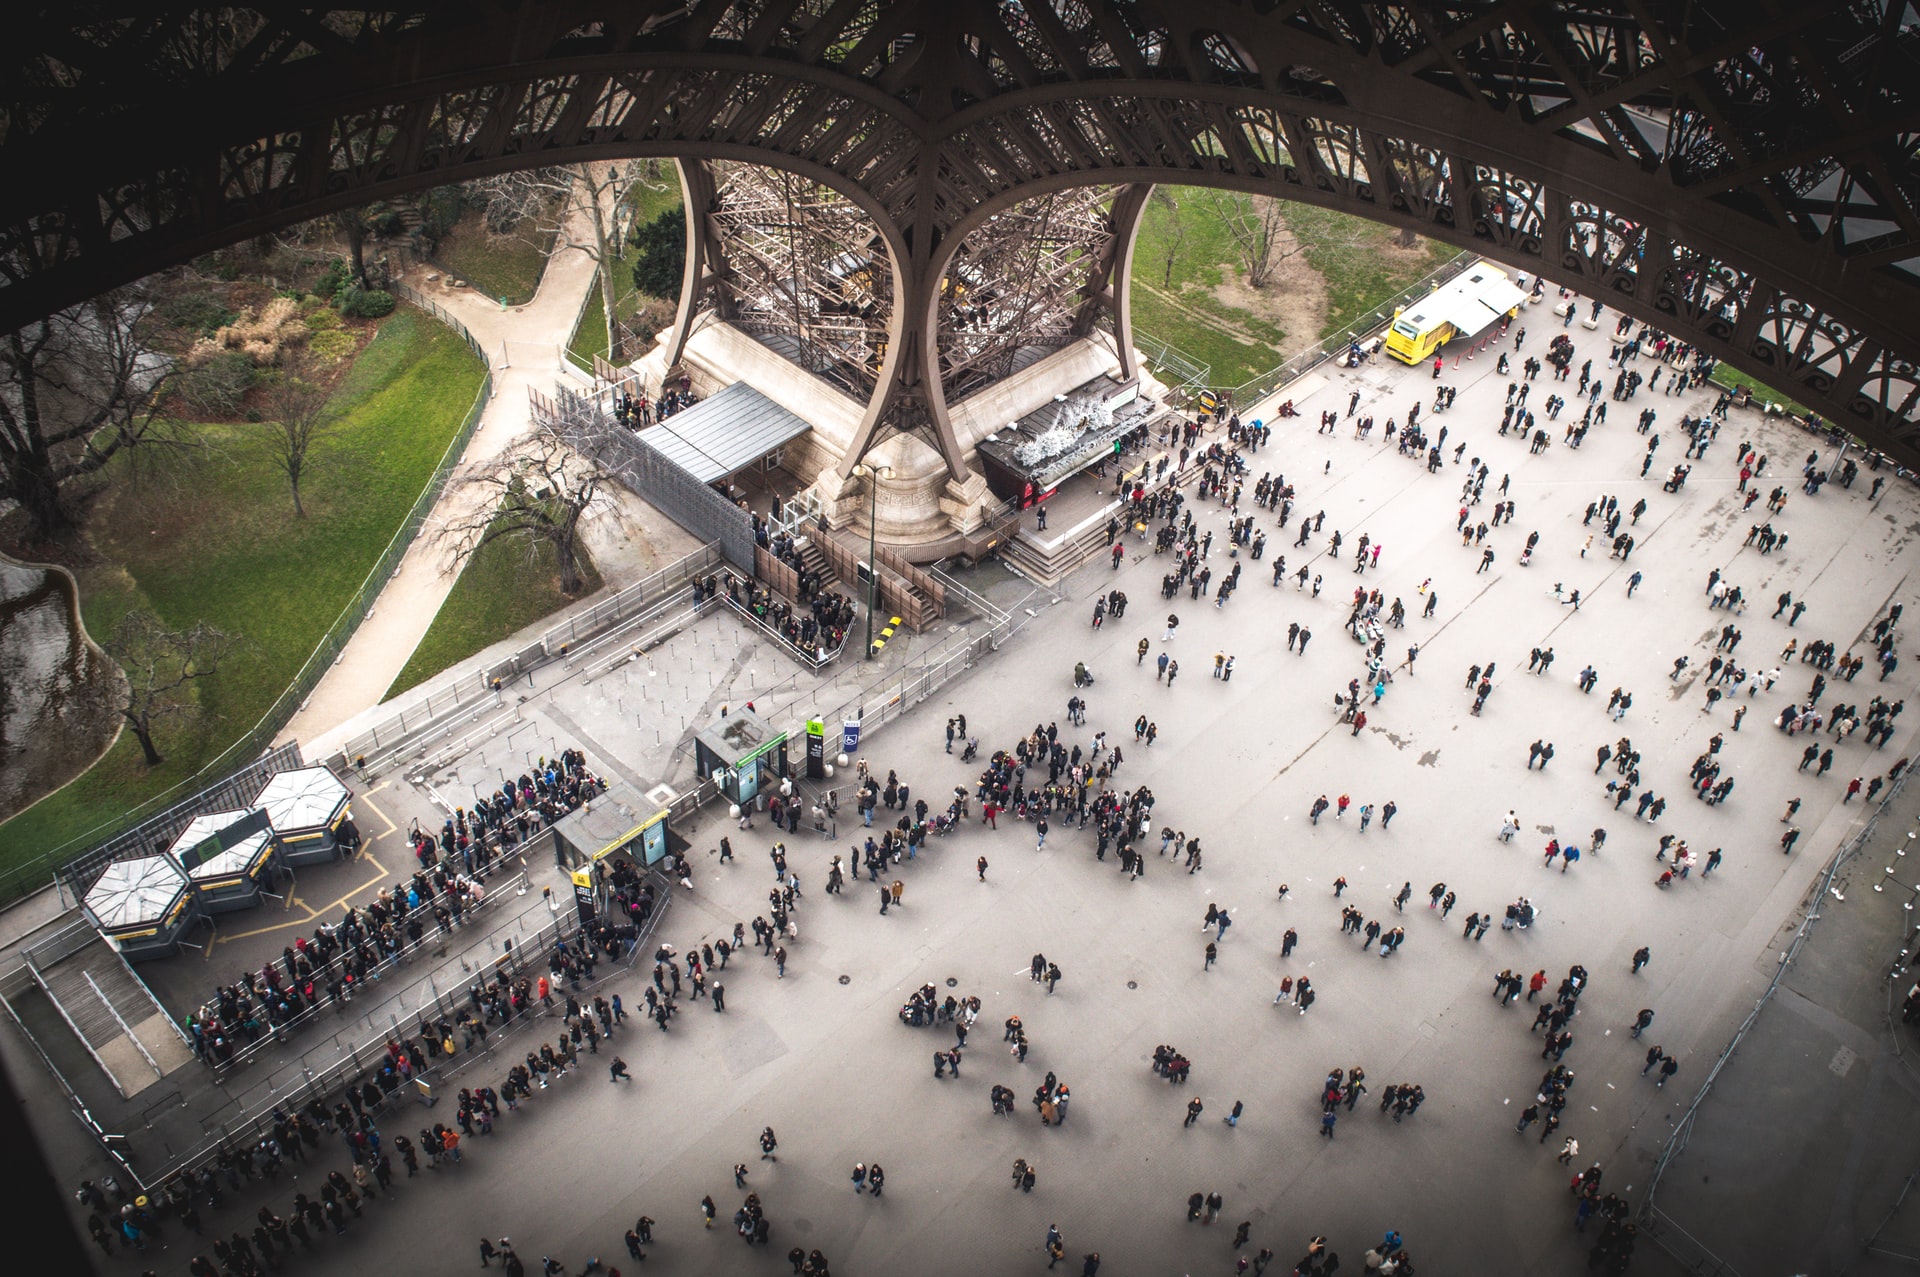 Looking through the transparent floor of the Eiffel Tower first level